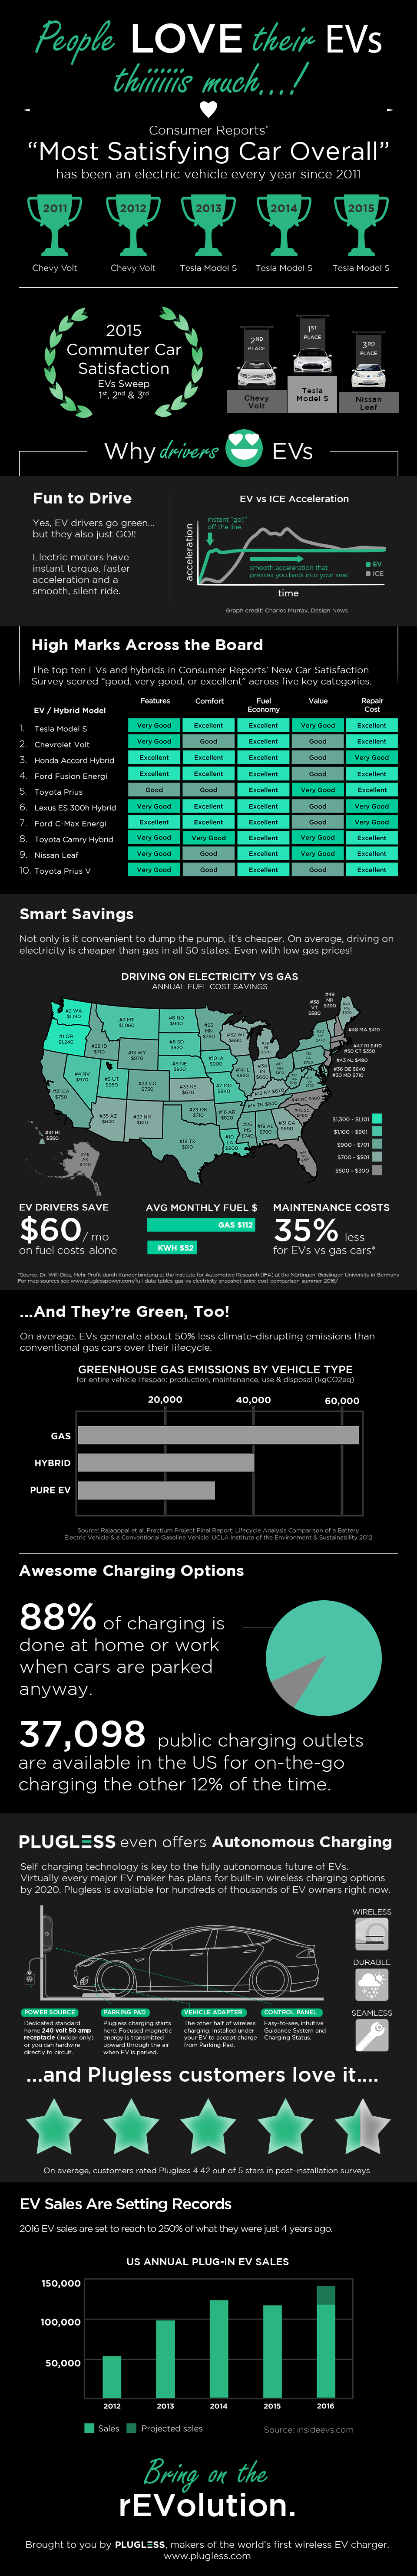 Infographic - people love evs THIS much - plugless